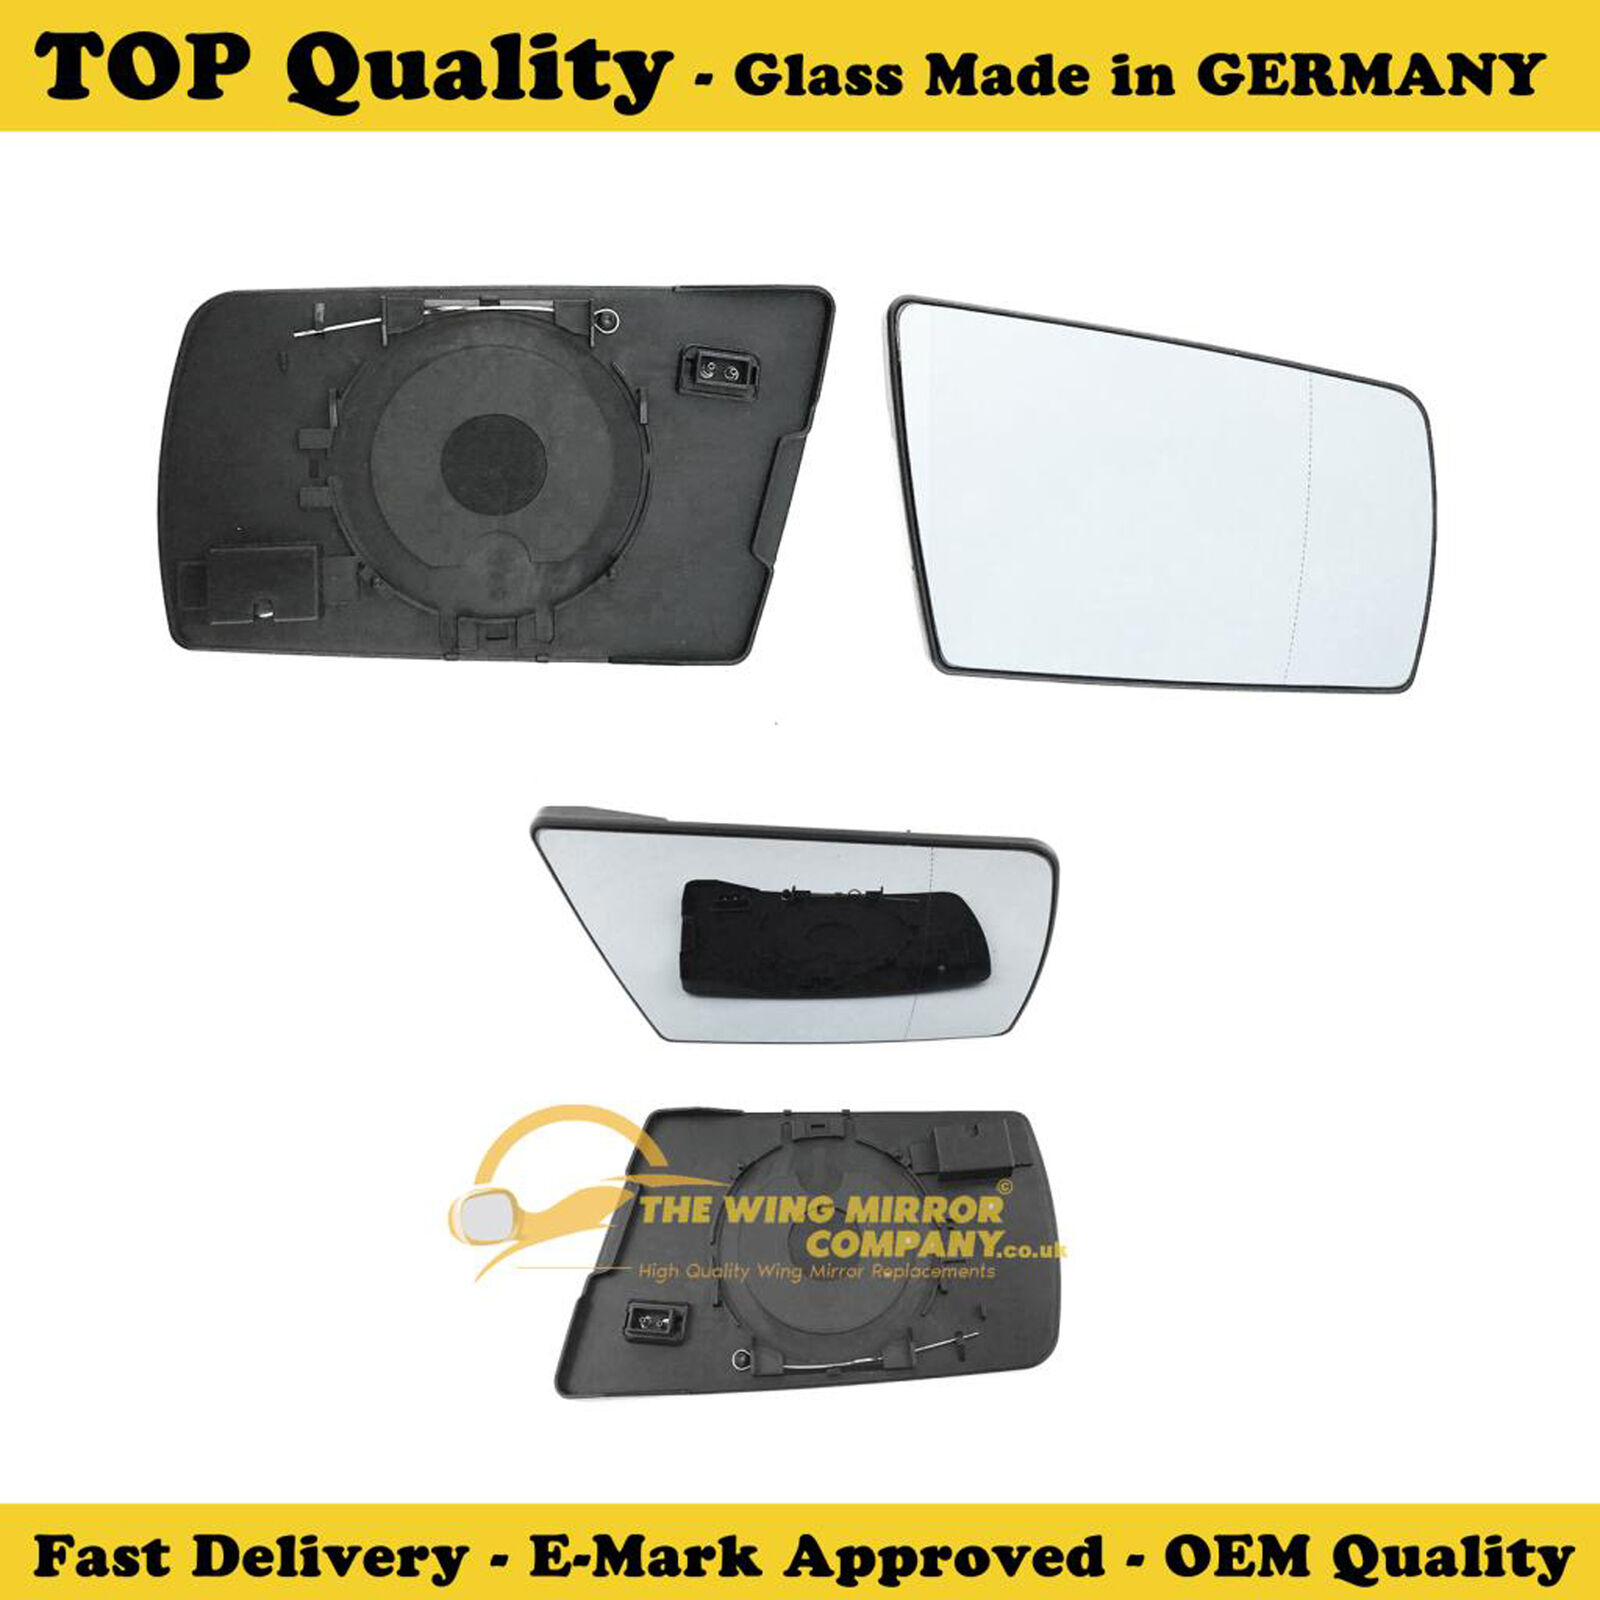 Max 73% OFF WING MIRROR MERCEDES SClass W140 REG ASP FITS 1991-1998 shopping HEATED